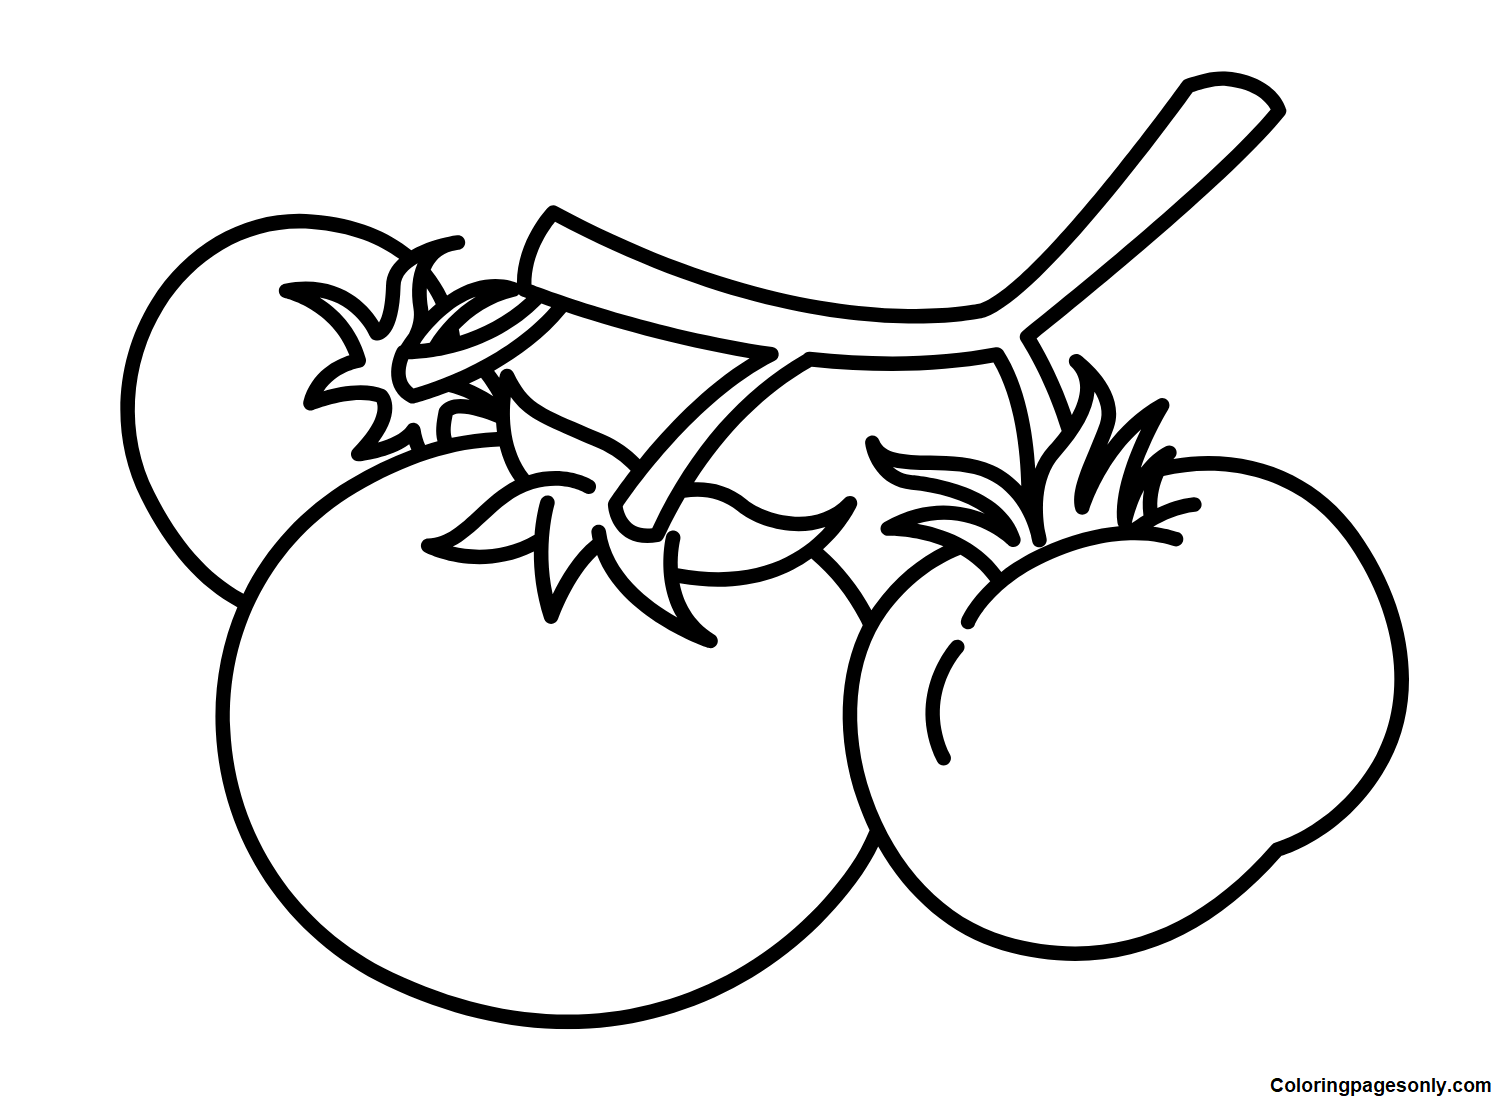 Green Tomatoes Coloring Pages